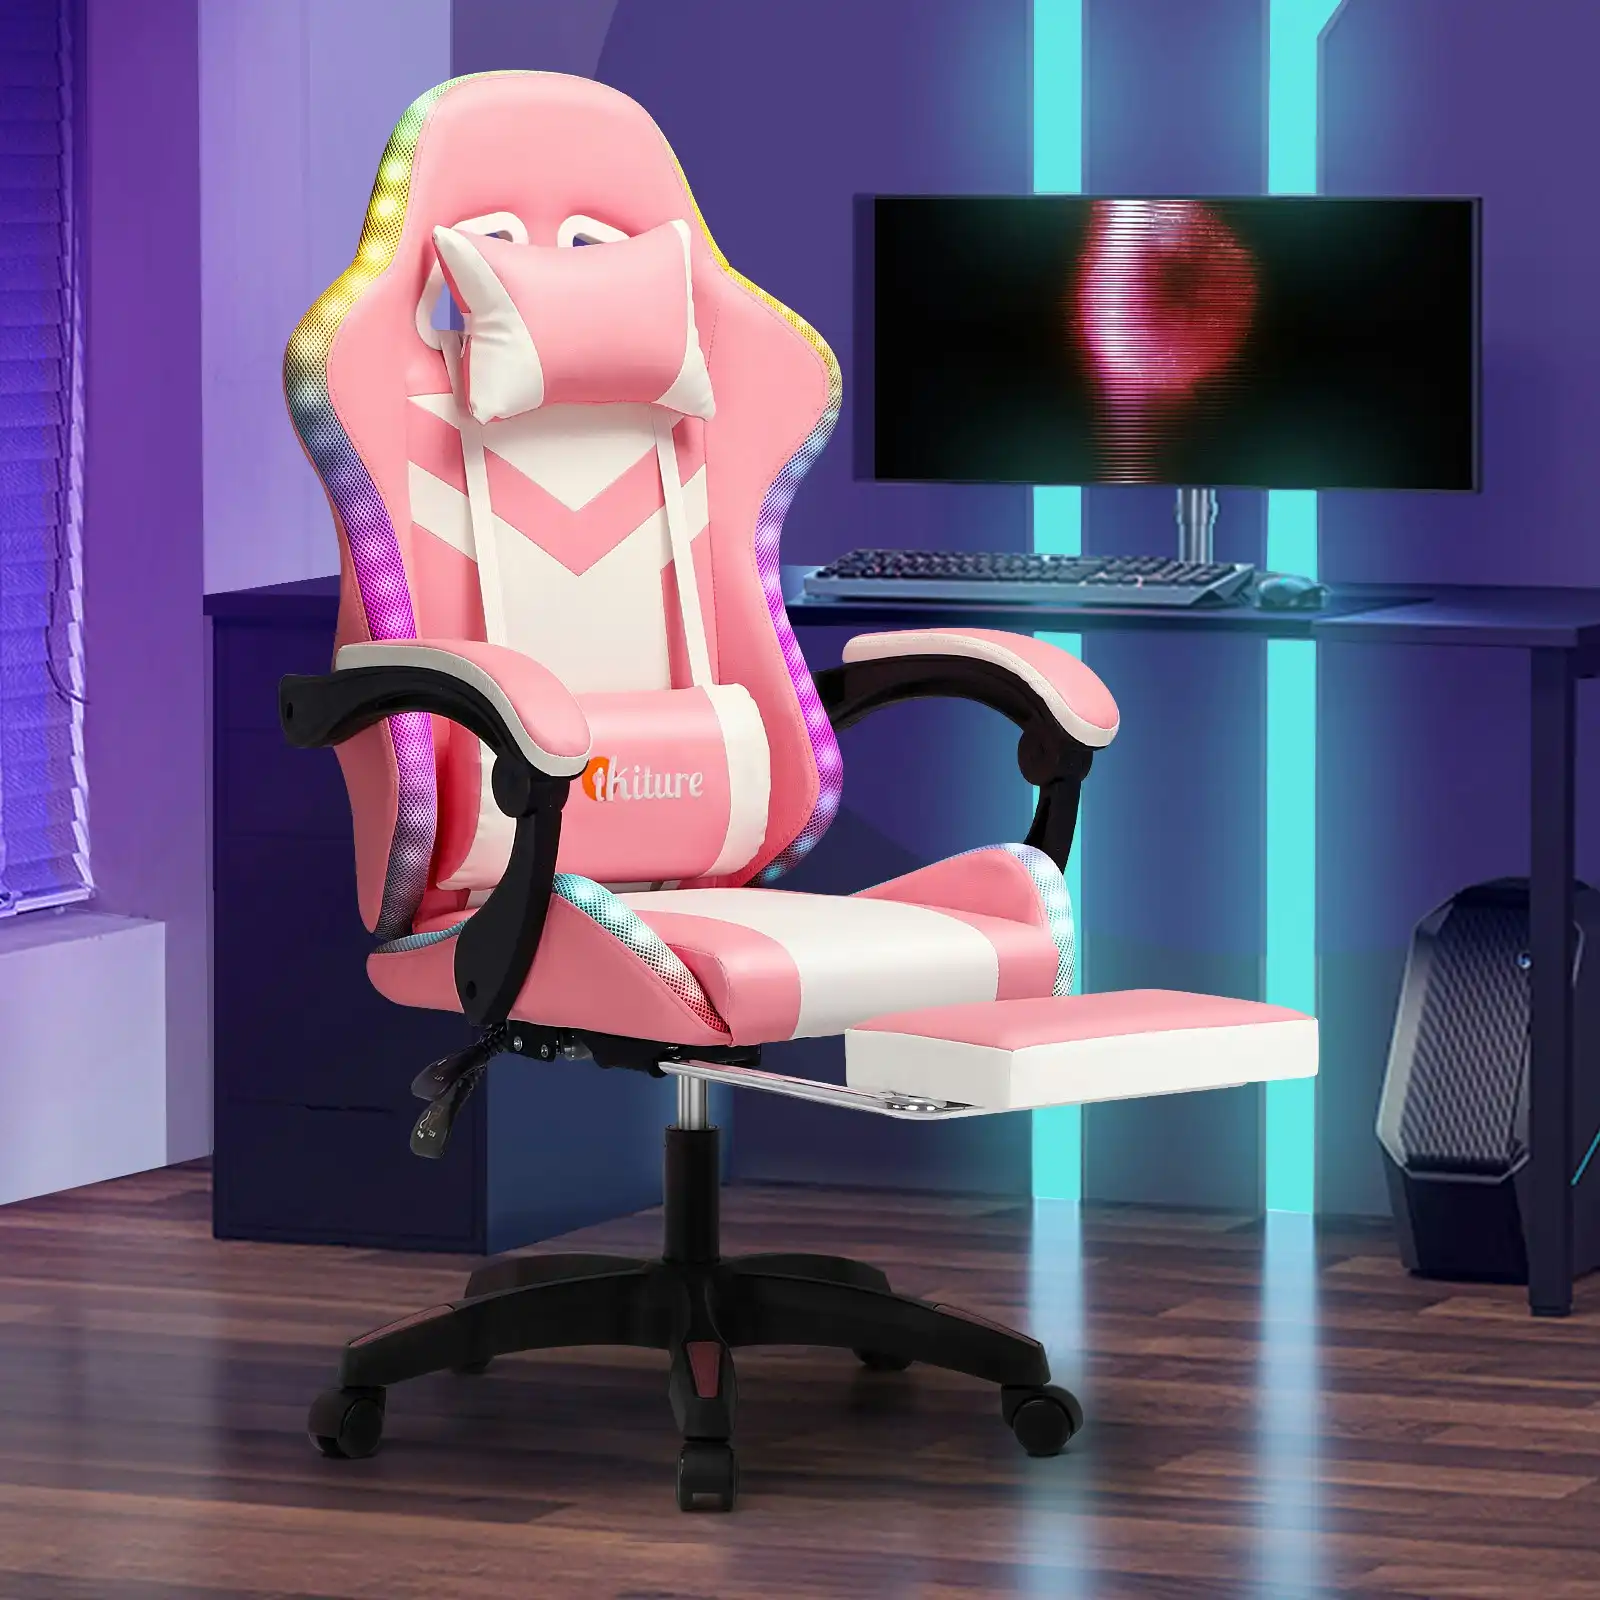 Oikiture Gaming Chair 7 RGB LED 8 Points Massage Racing Recliner Office Computer Pink&White